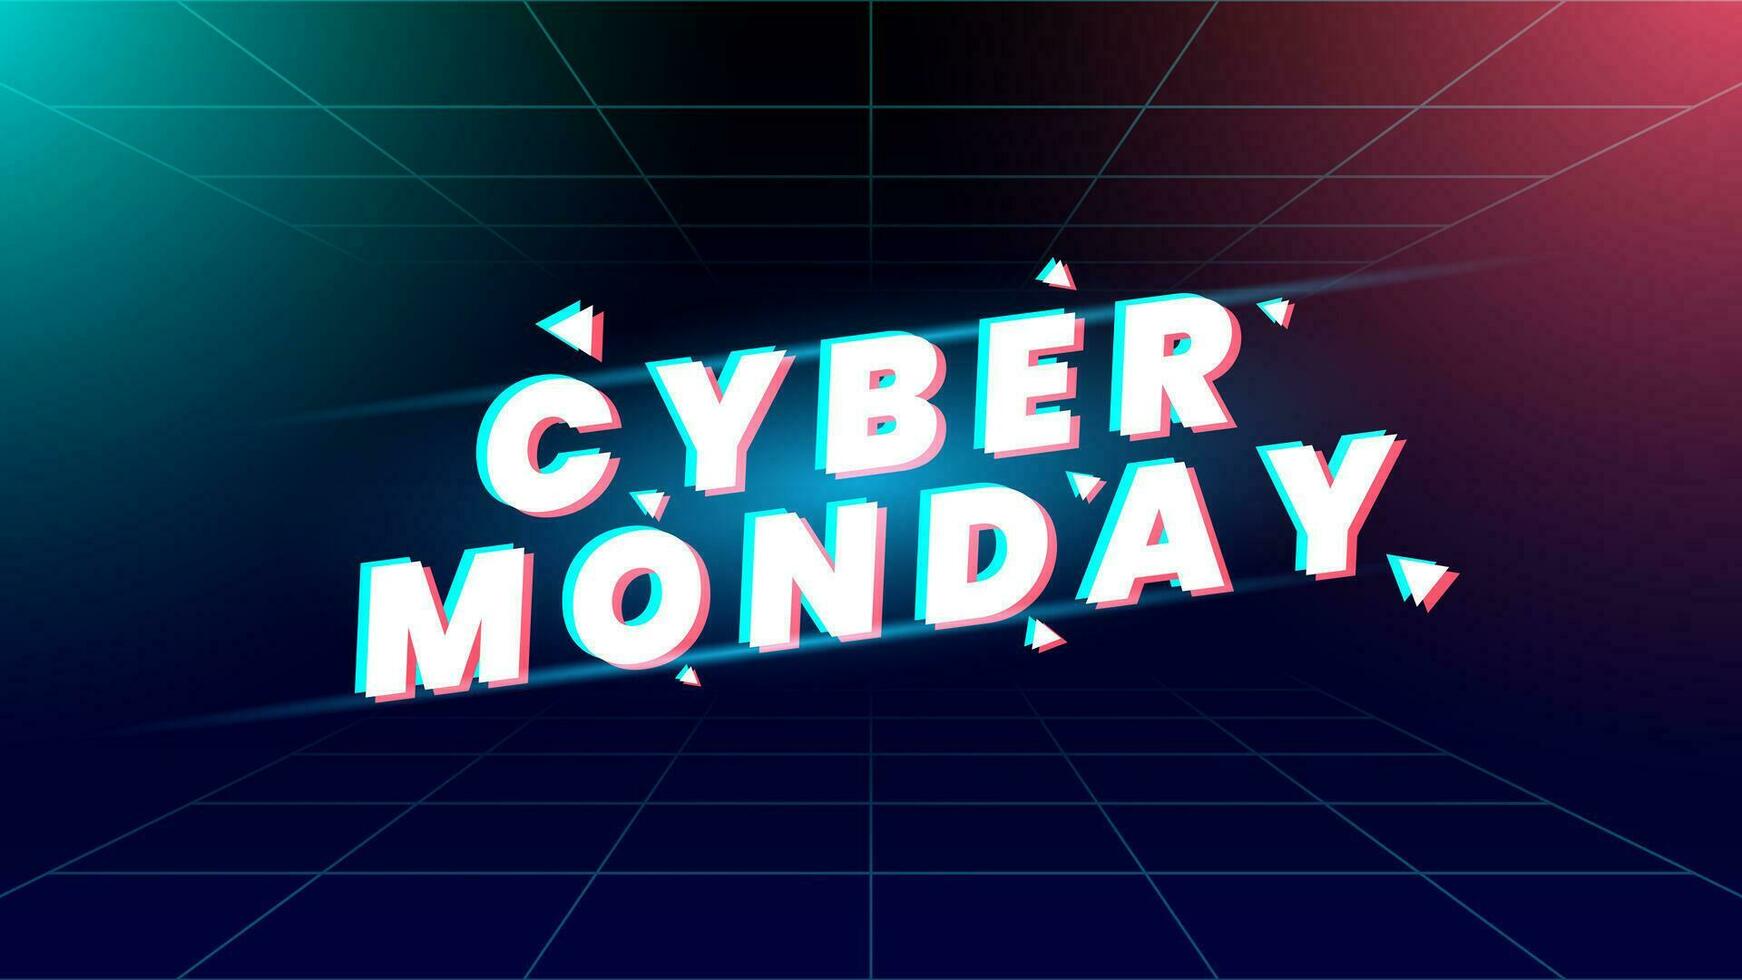 Cyber monday promotion banner design with glitch style. Vector illustration